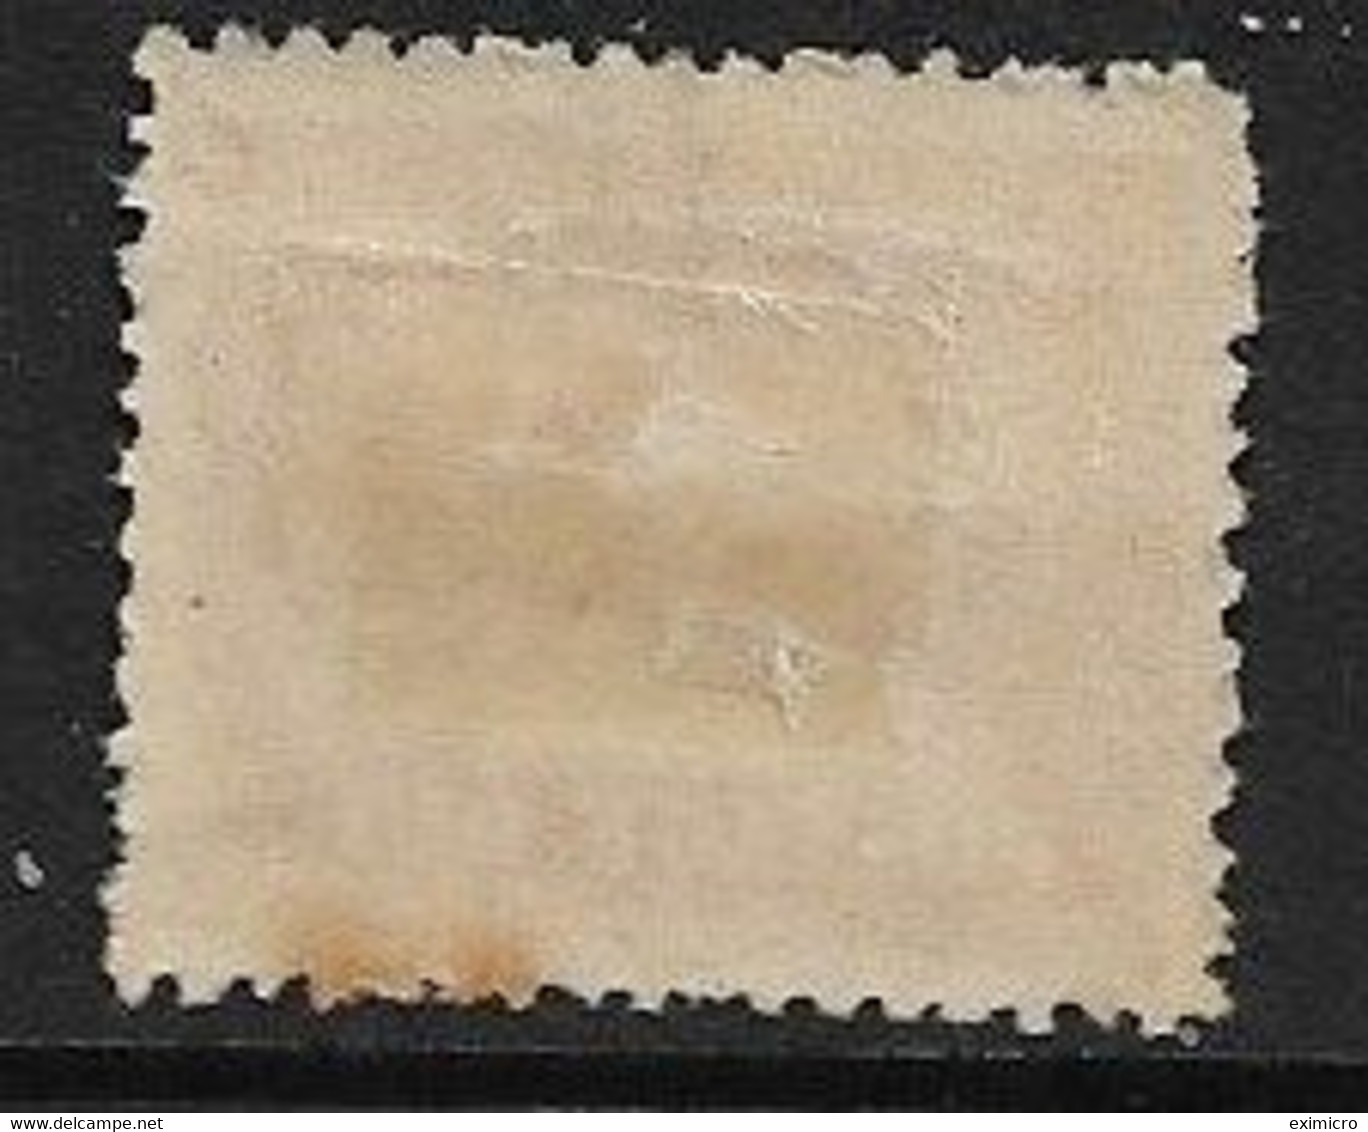 NEW ZEALAND 1943 - 1949 3d POSTAGE DUE FINE USED - WATERMARK UNCHECKED, FINE USED Minimum Cat £17 - Strafport